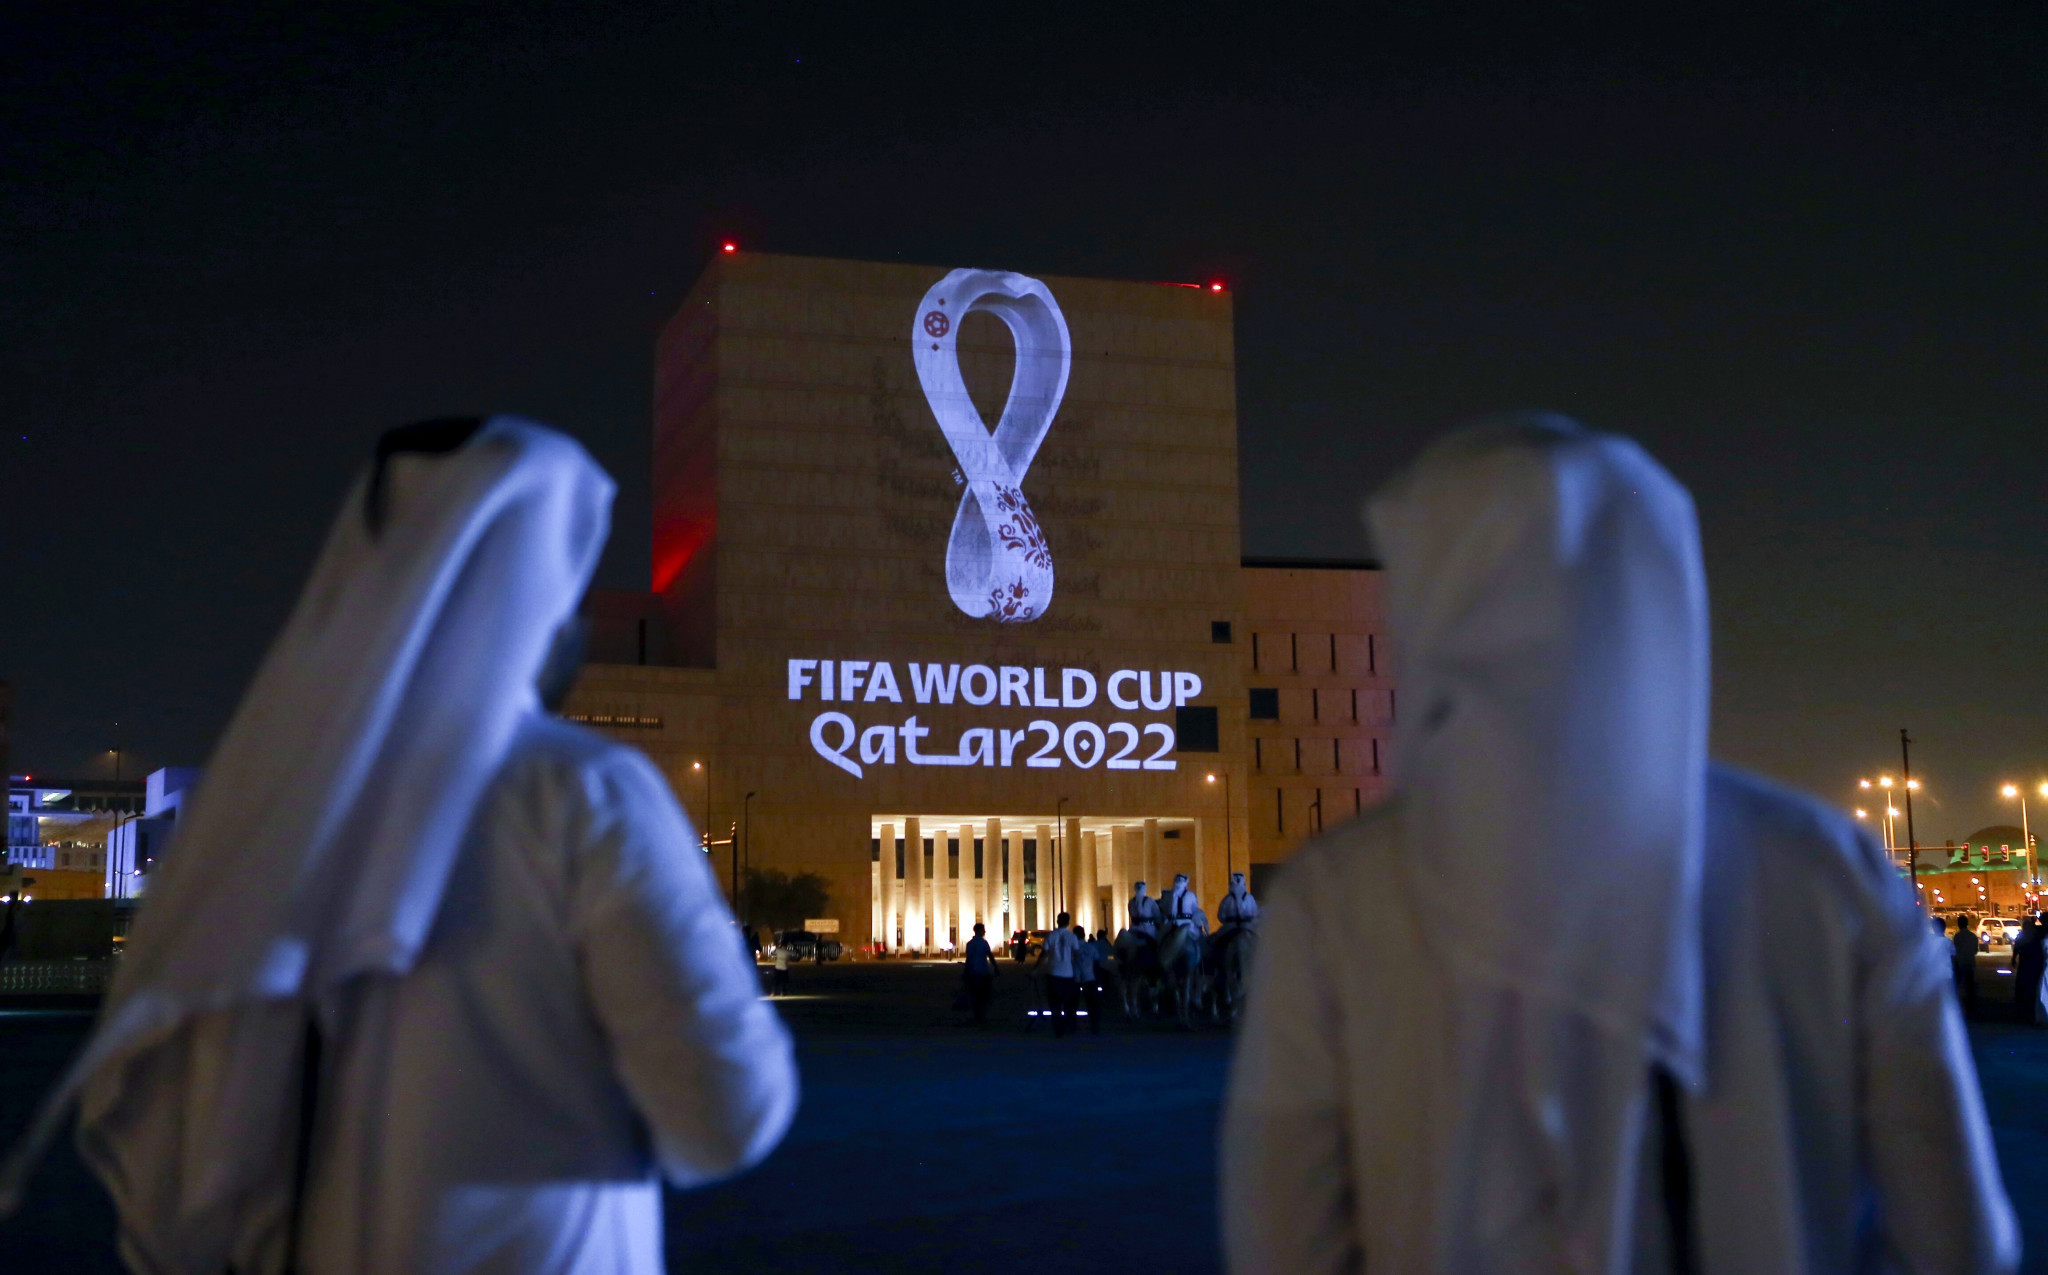 Qatar could be lenient on minor offences by foreign fans at World Cup